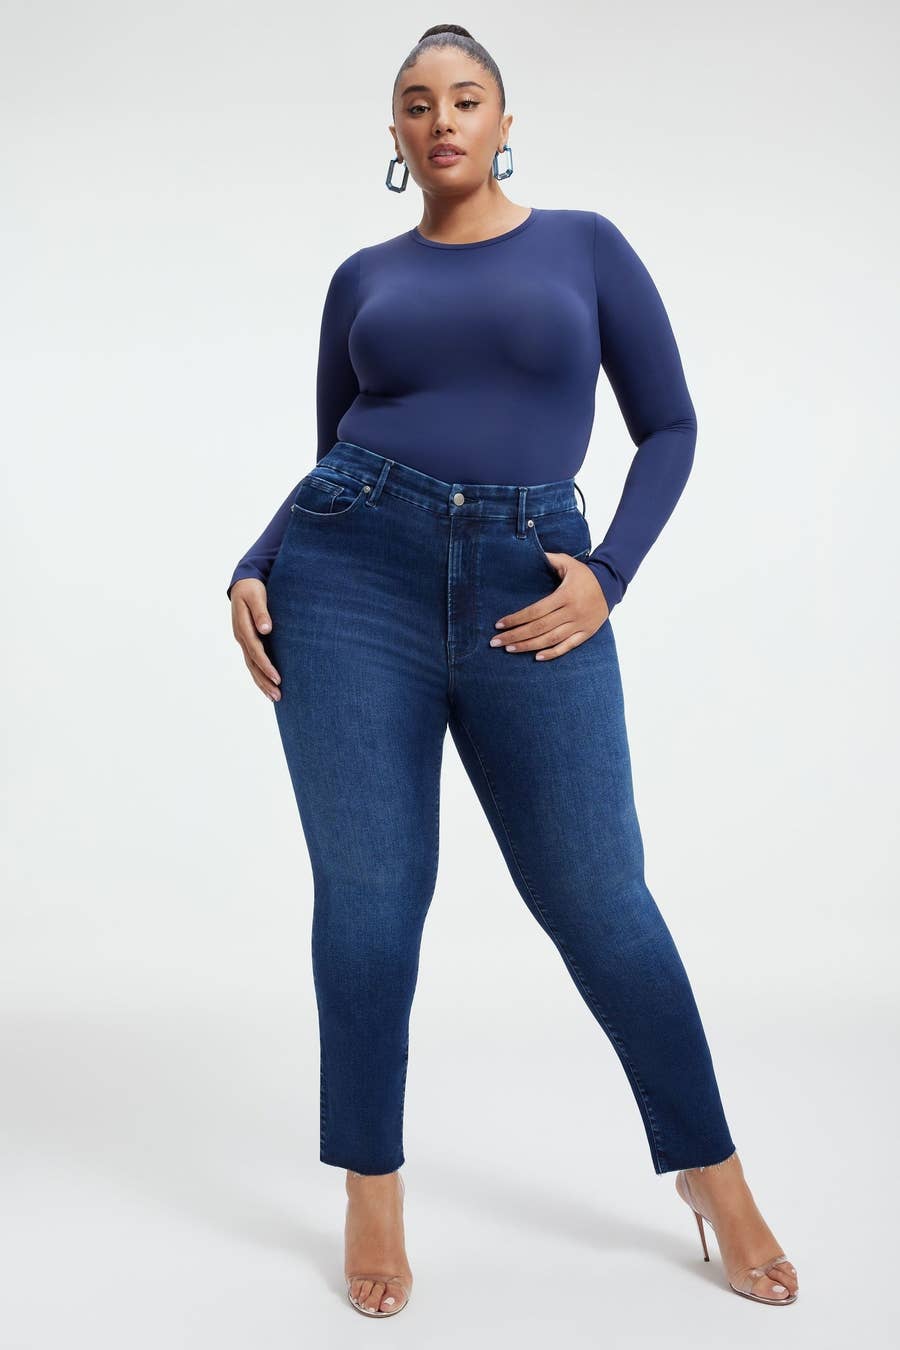 Plus Size Black High Waist Pants Online in India